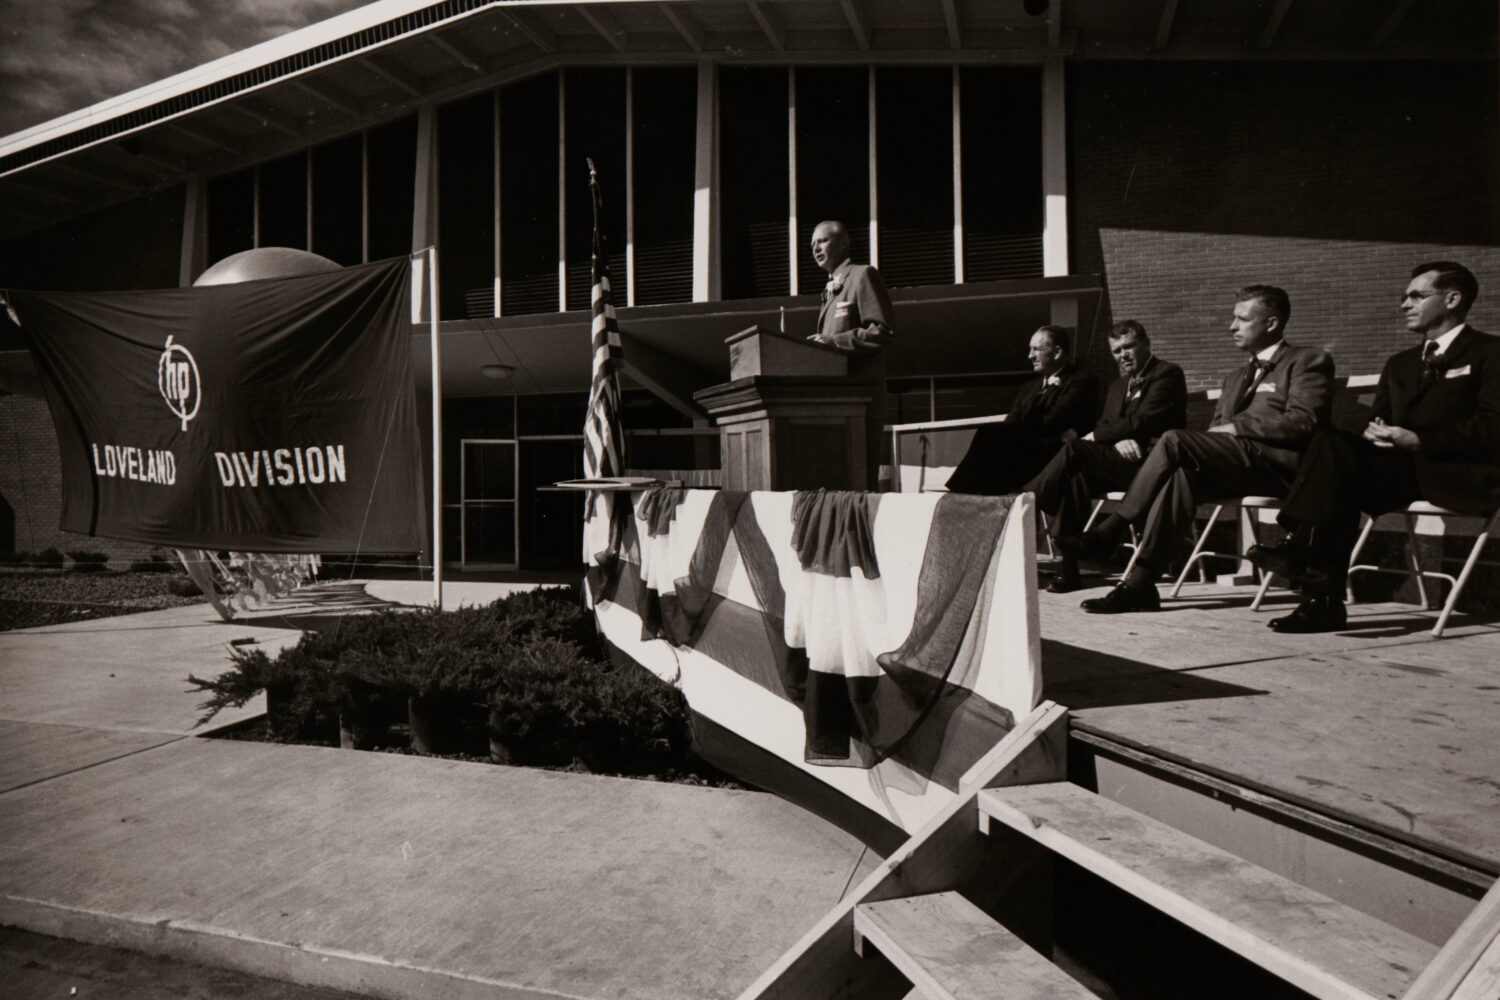 Dave Packard speaking at the opening of Hewlett-Packard's Loveland, Colorado, plant.